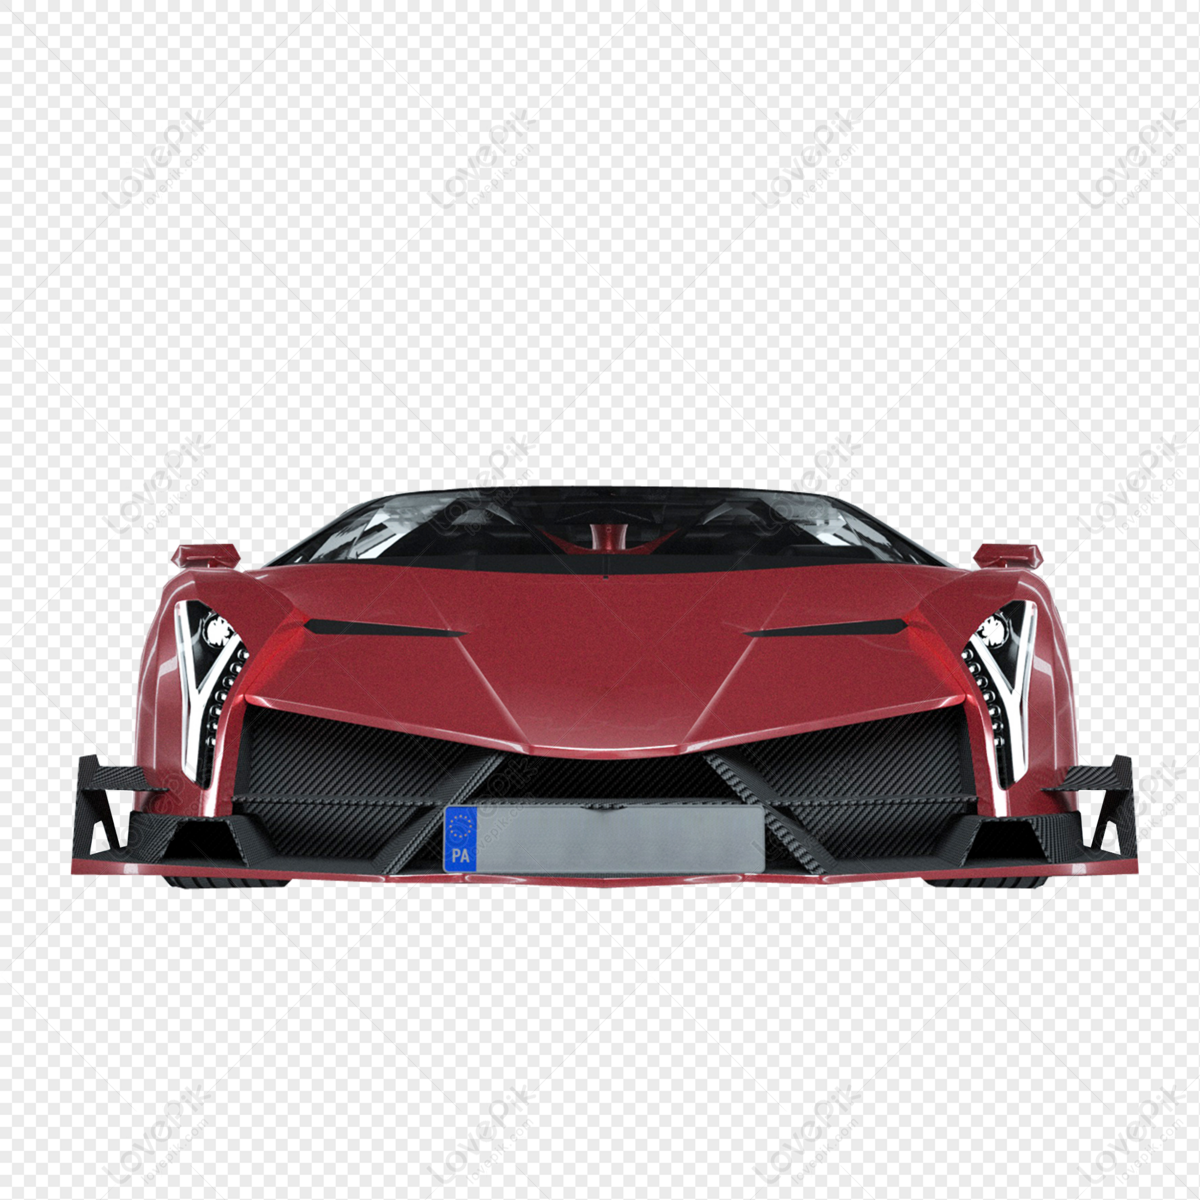 Cool Sports Car PNG Transparent And Clipart Image For Free Download -  Lovepik | 401191156